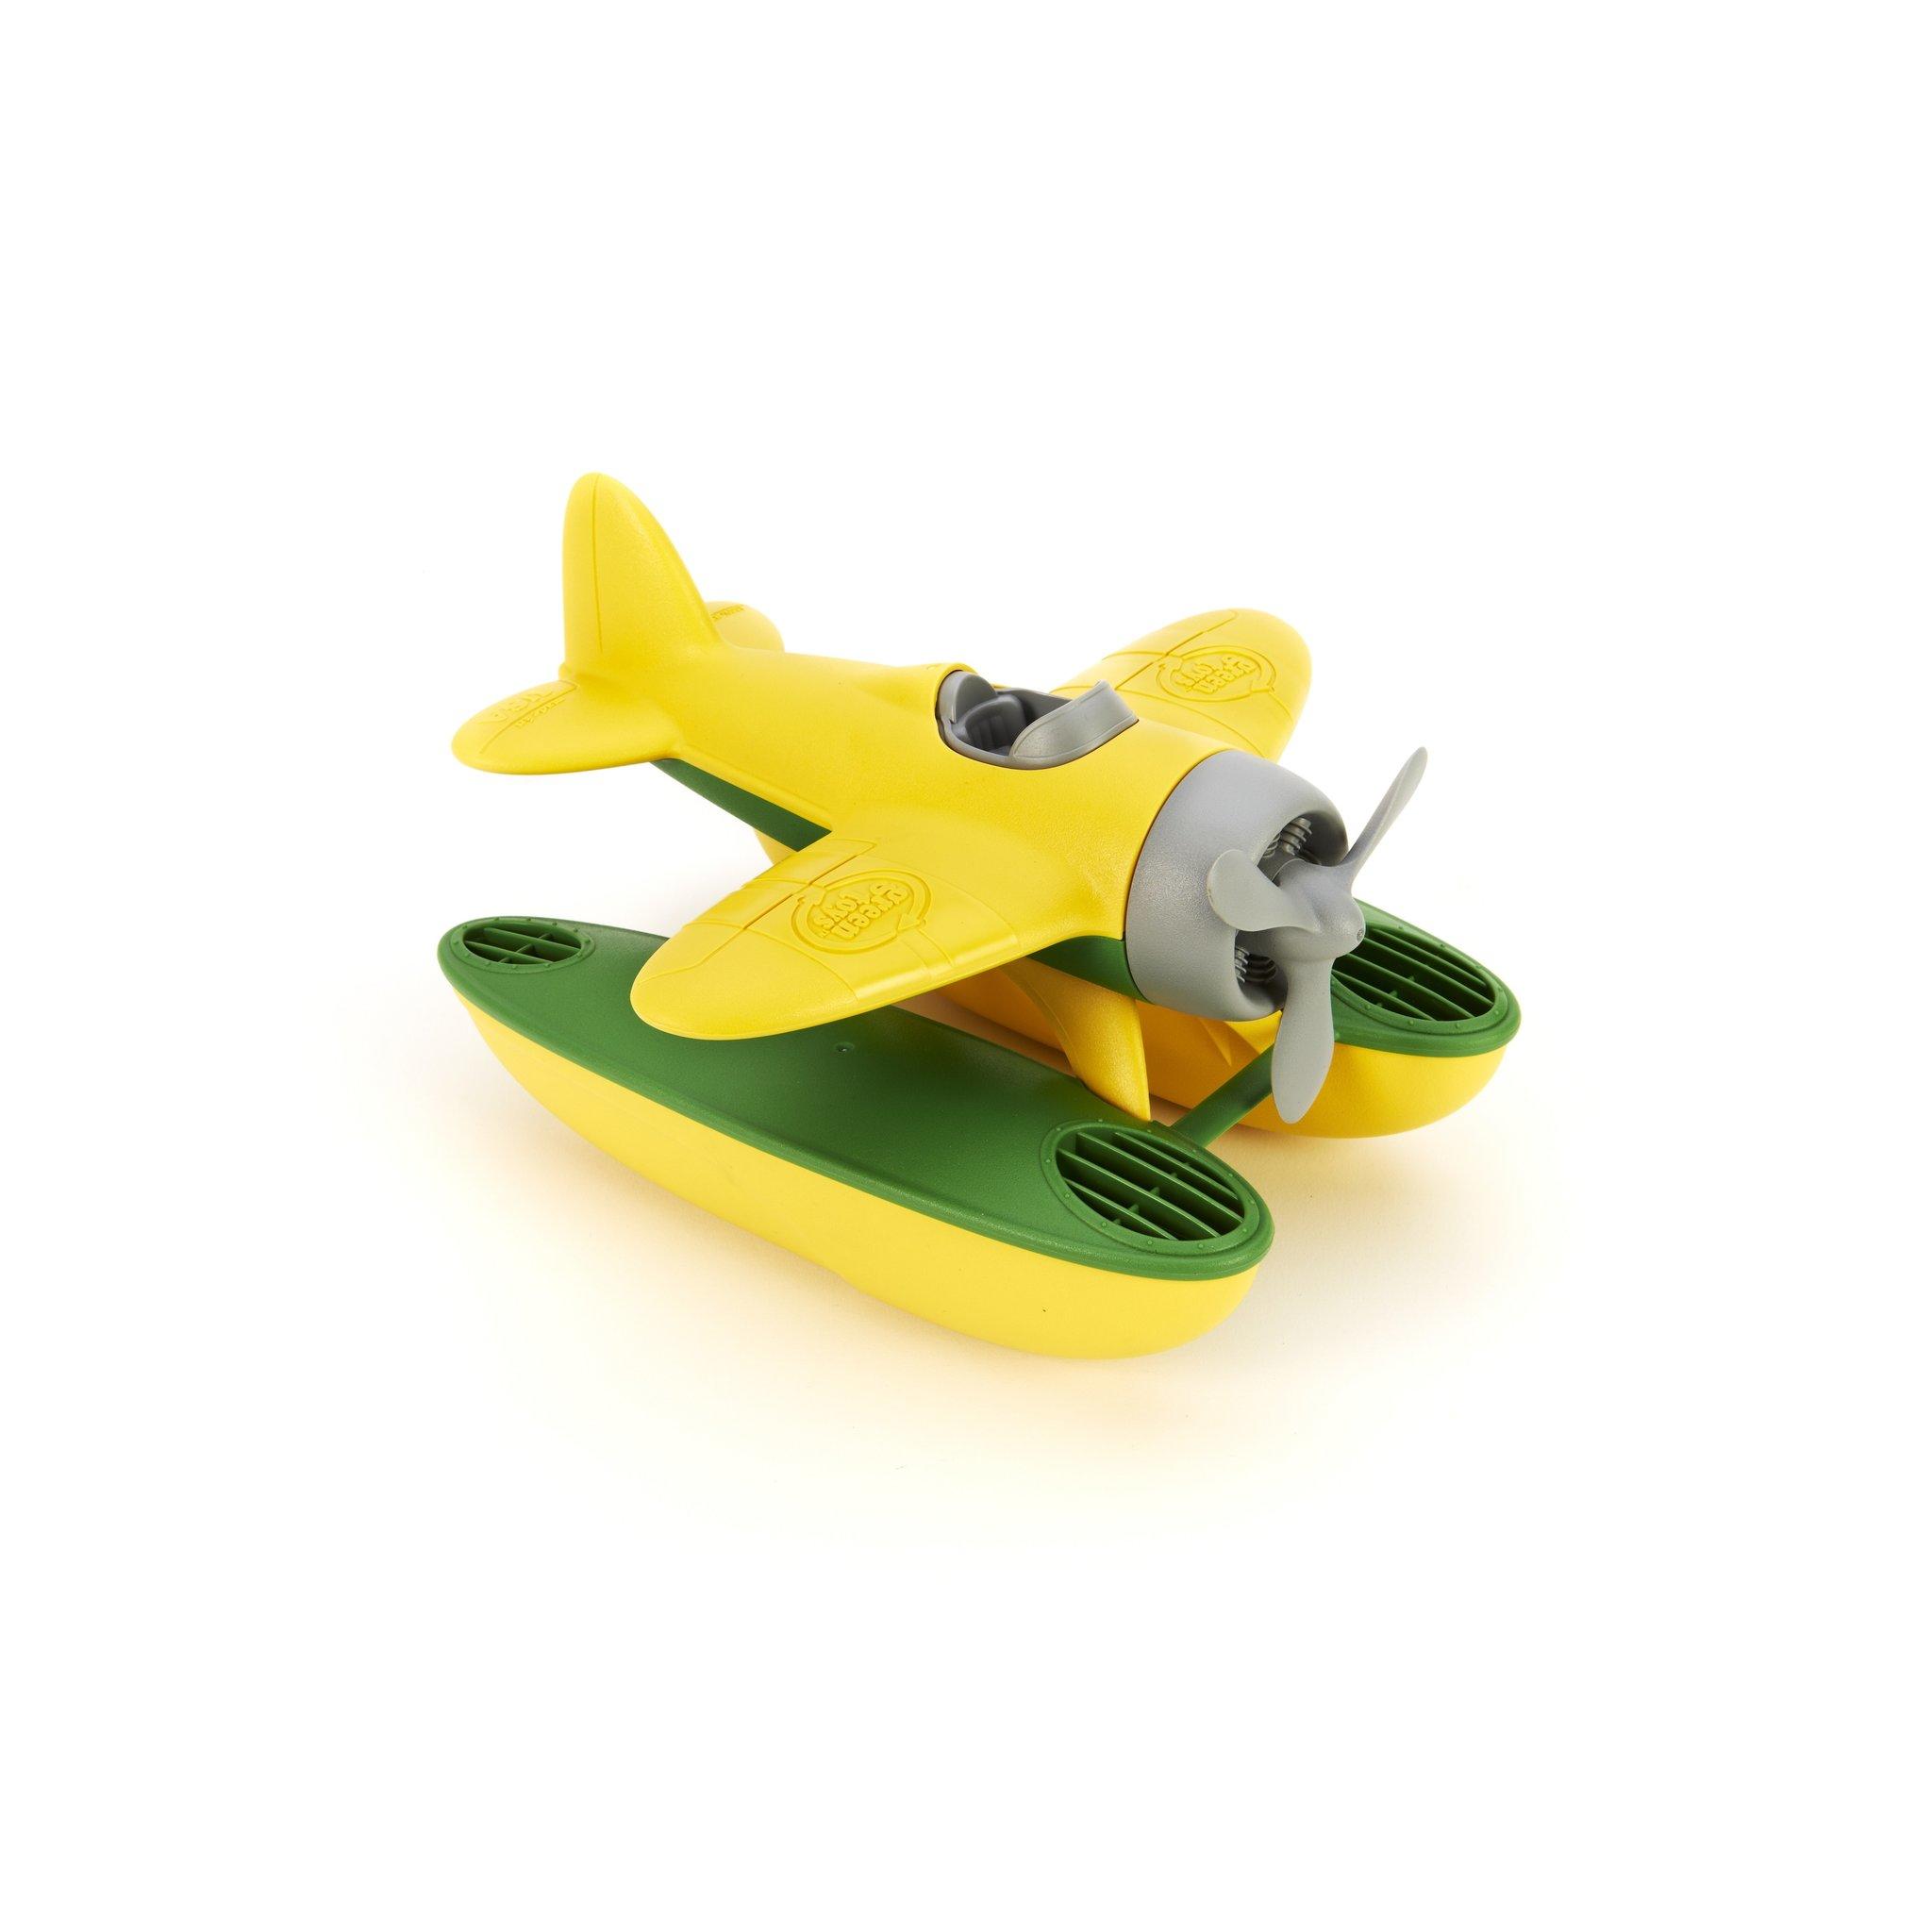 Yellow and green seaplane. White background.